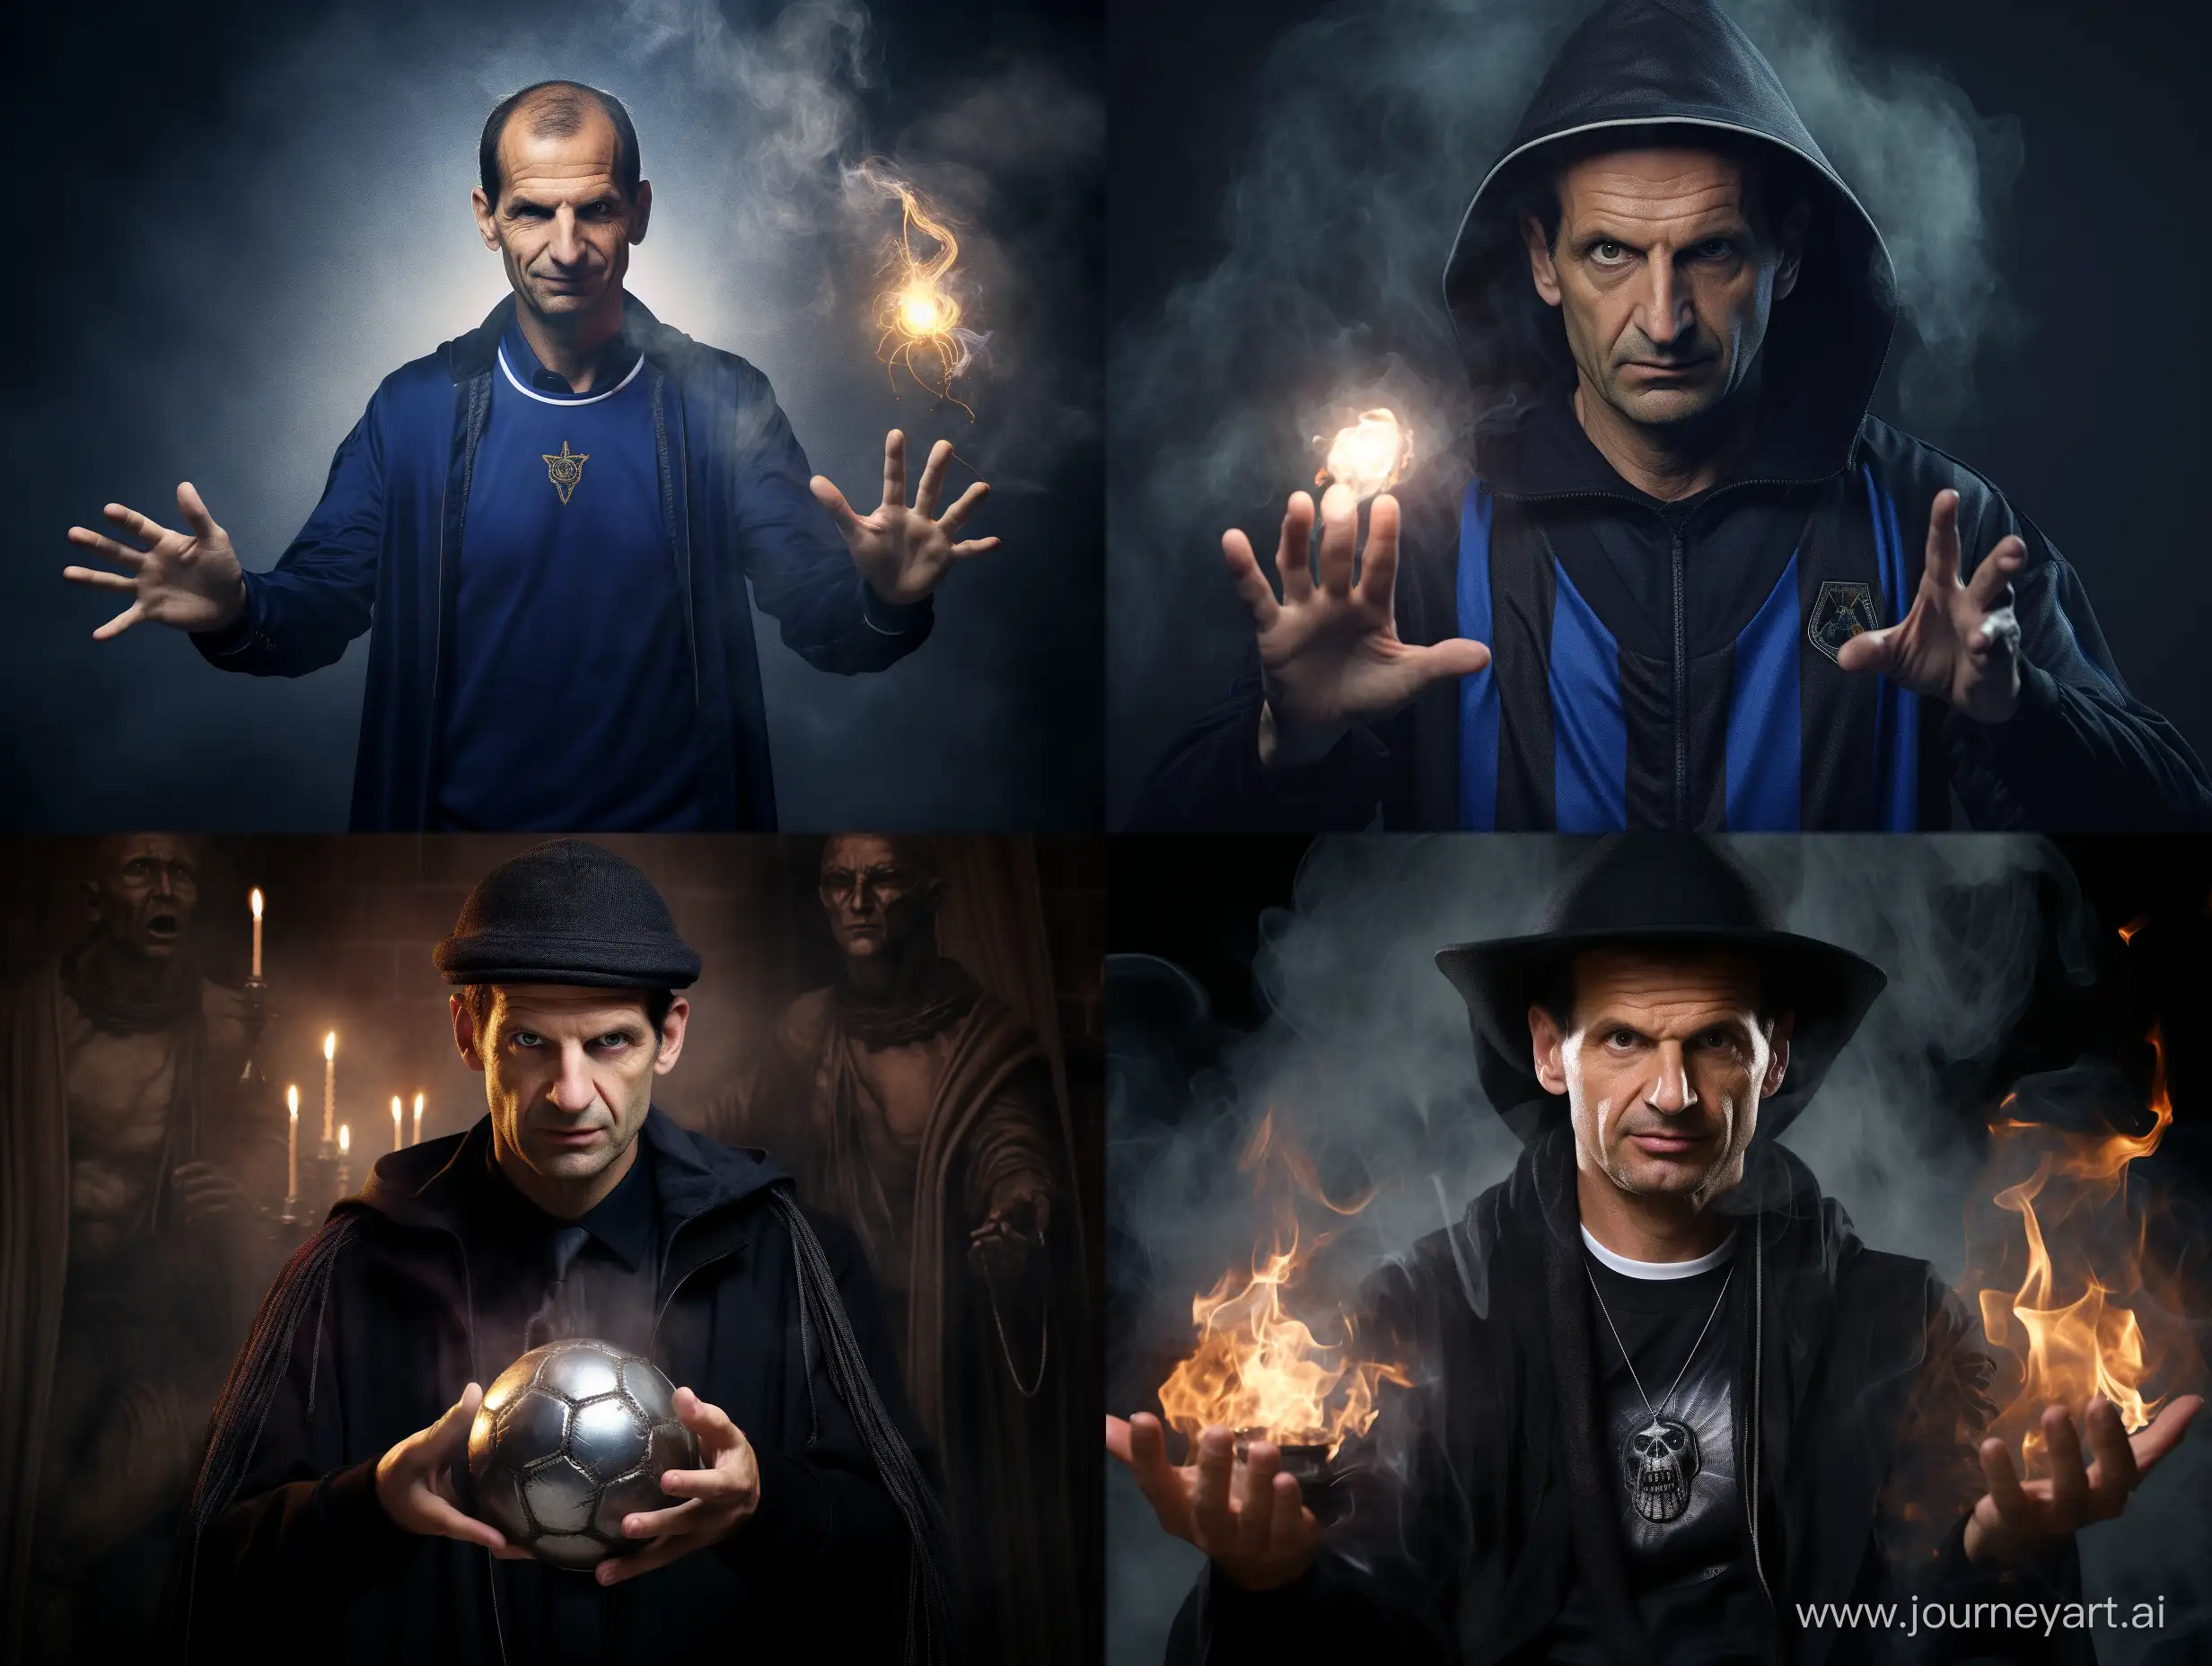 Massimiliano Allegri dressed as a sorcerer